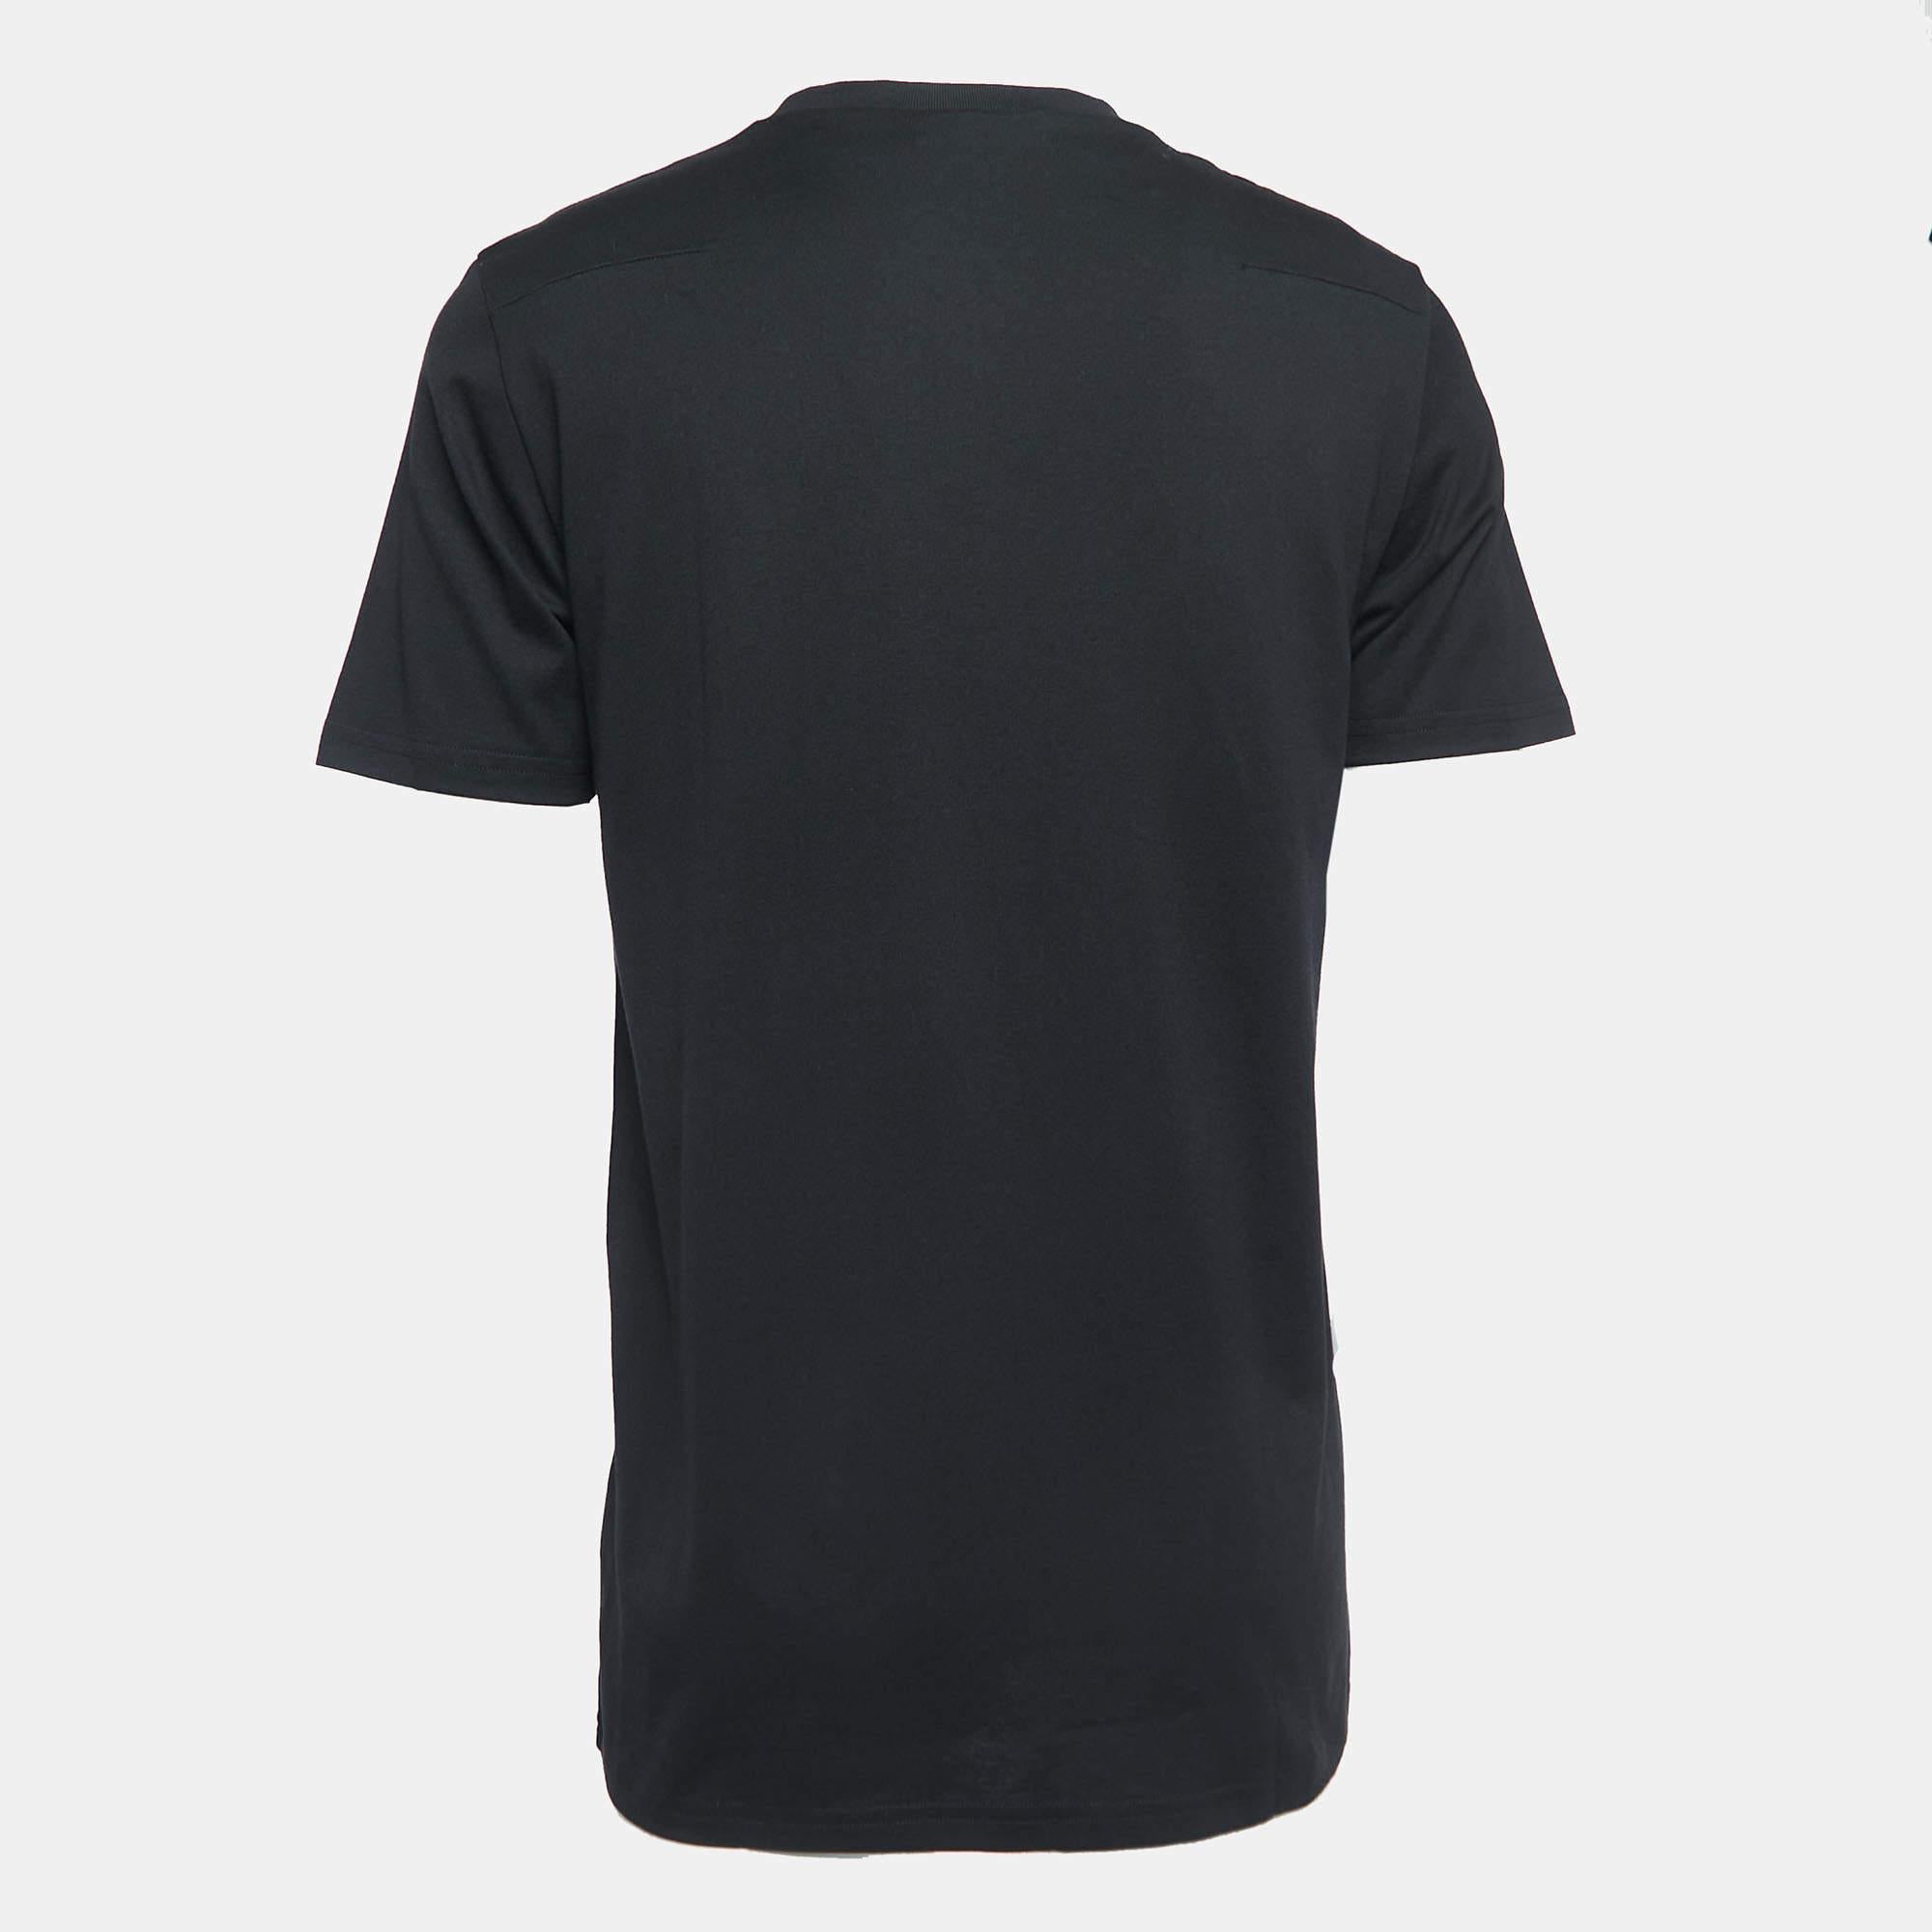 Dior Homme Black Bee Embroidered Cotton Crew Neck T-Shirt S In Good Condition For Sale In Dubai, Al Qouz 2